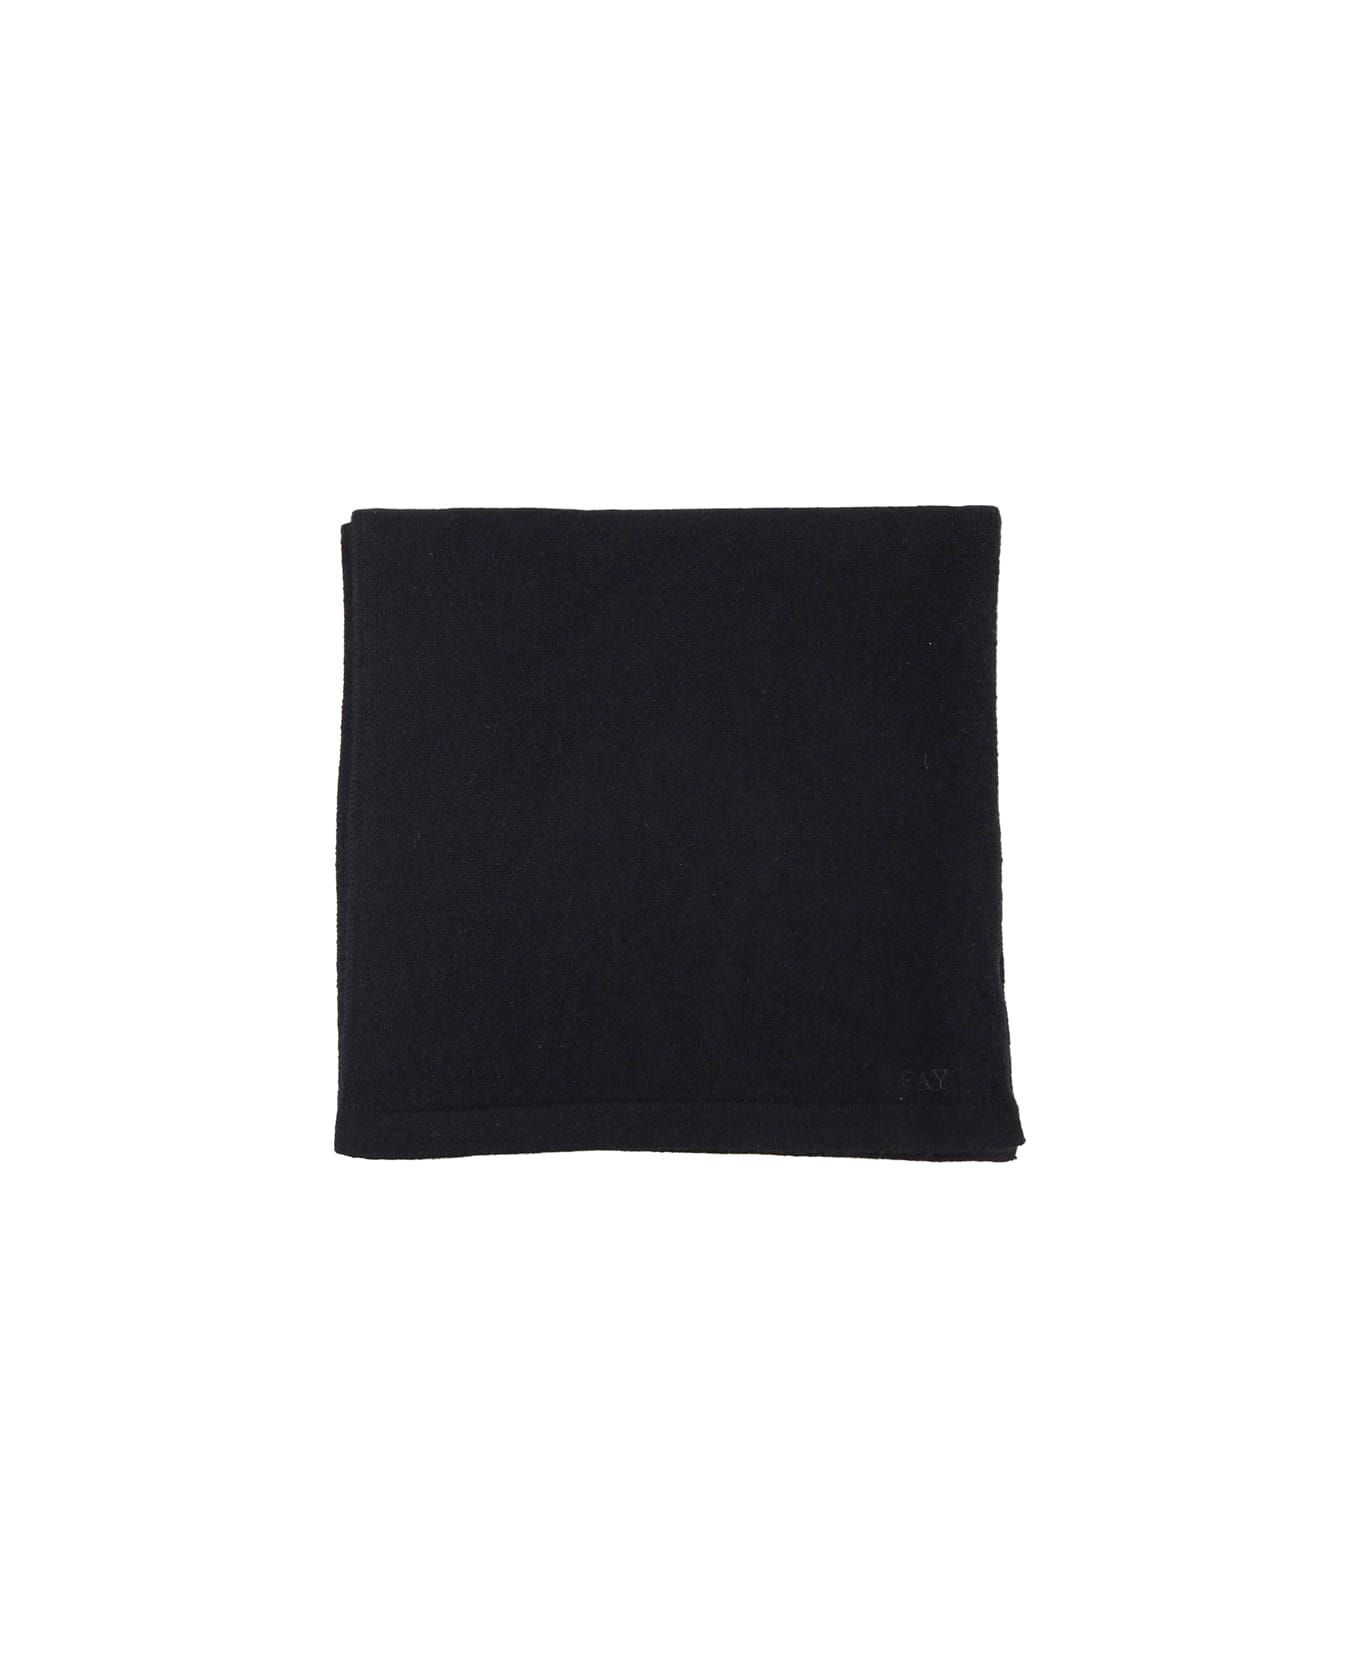 Fay Scarf In Cashmere With Little Logo Sign - Black スカーフ＆ストール